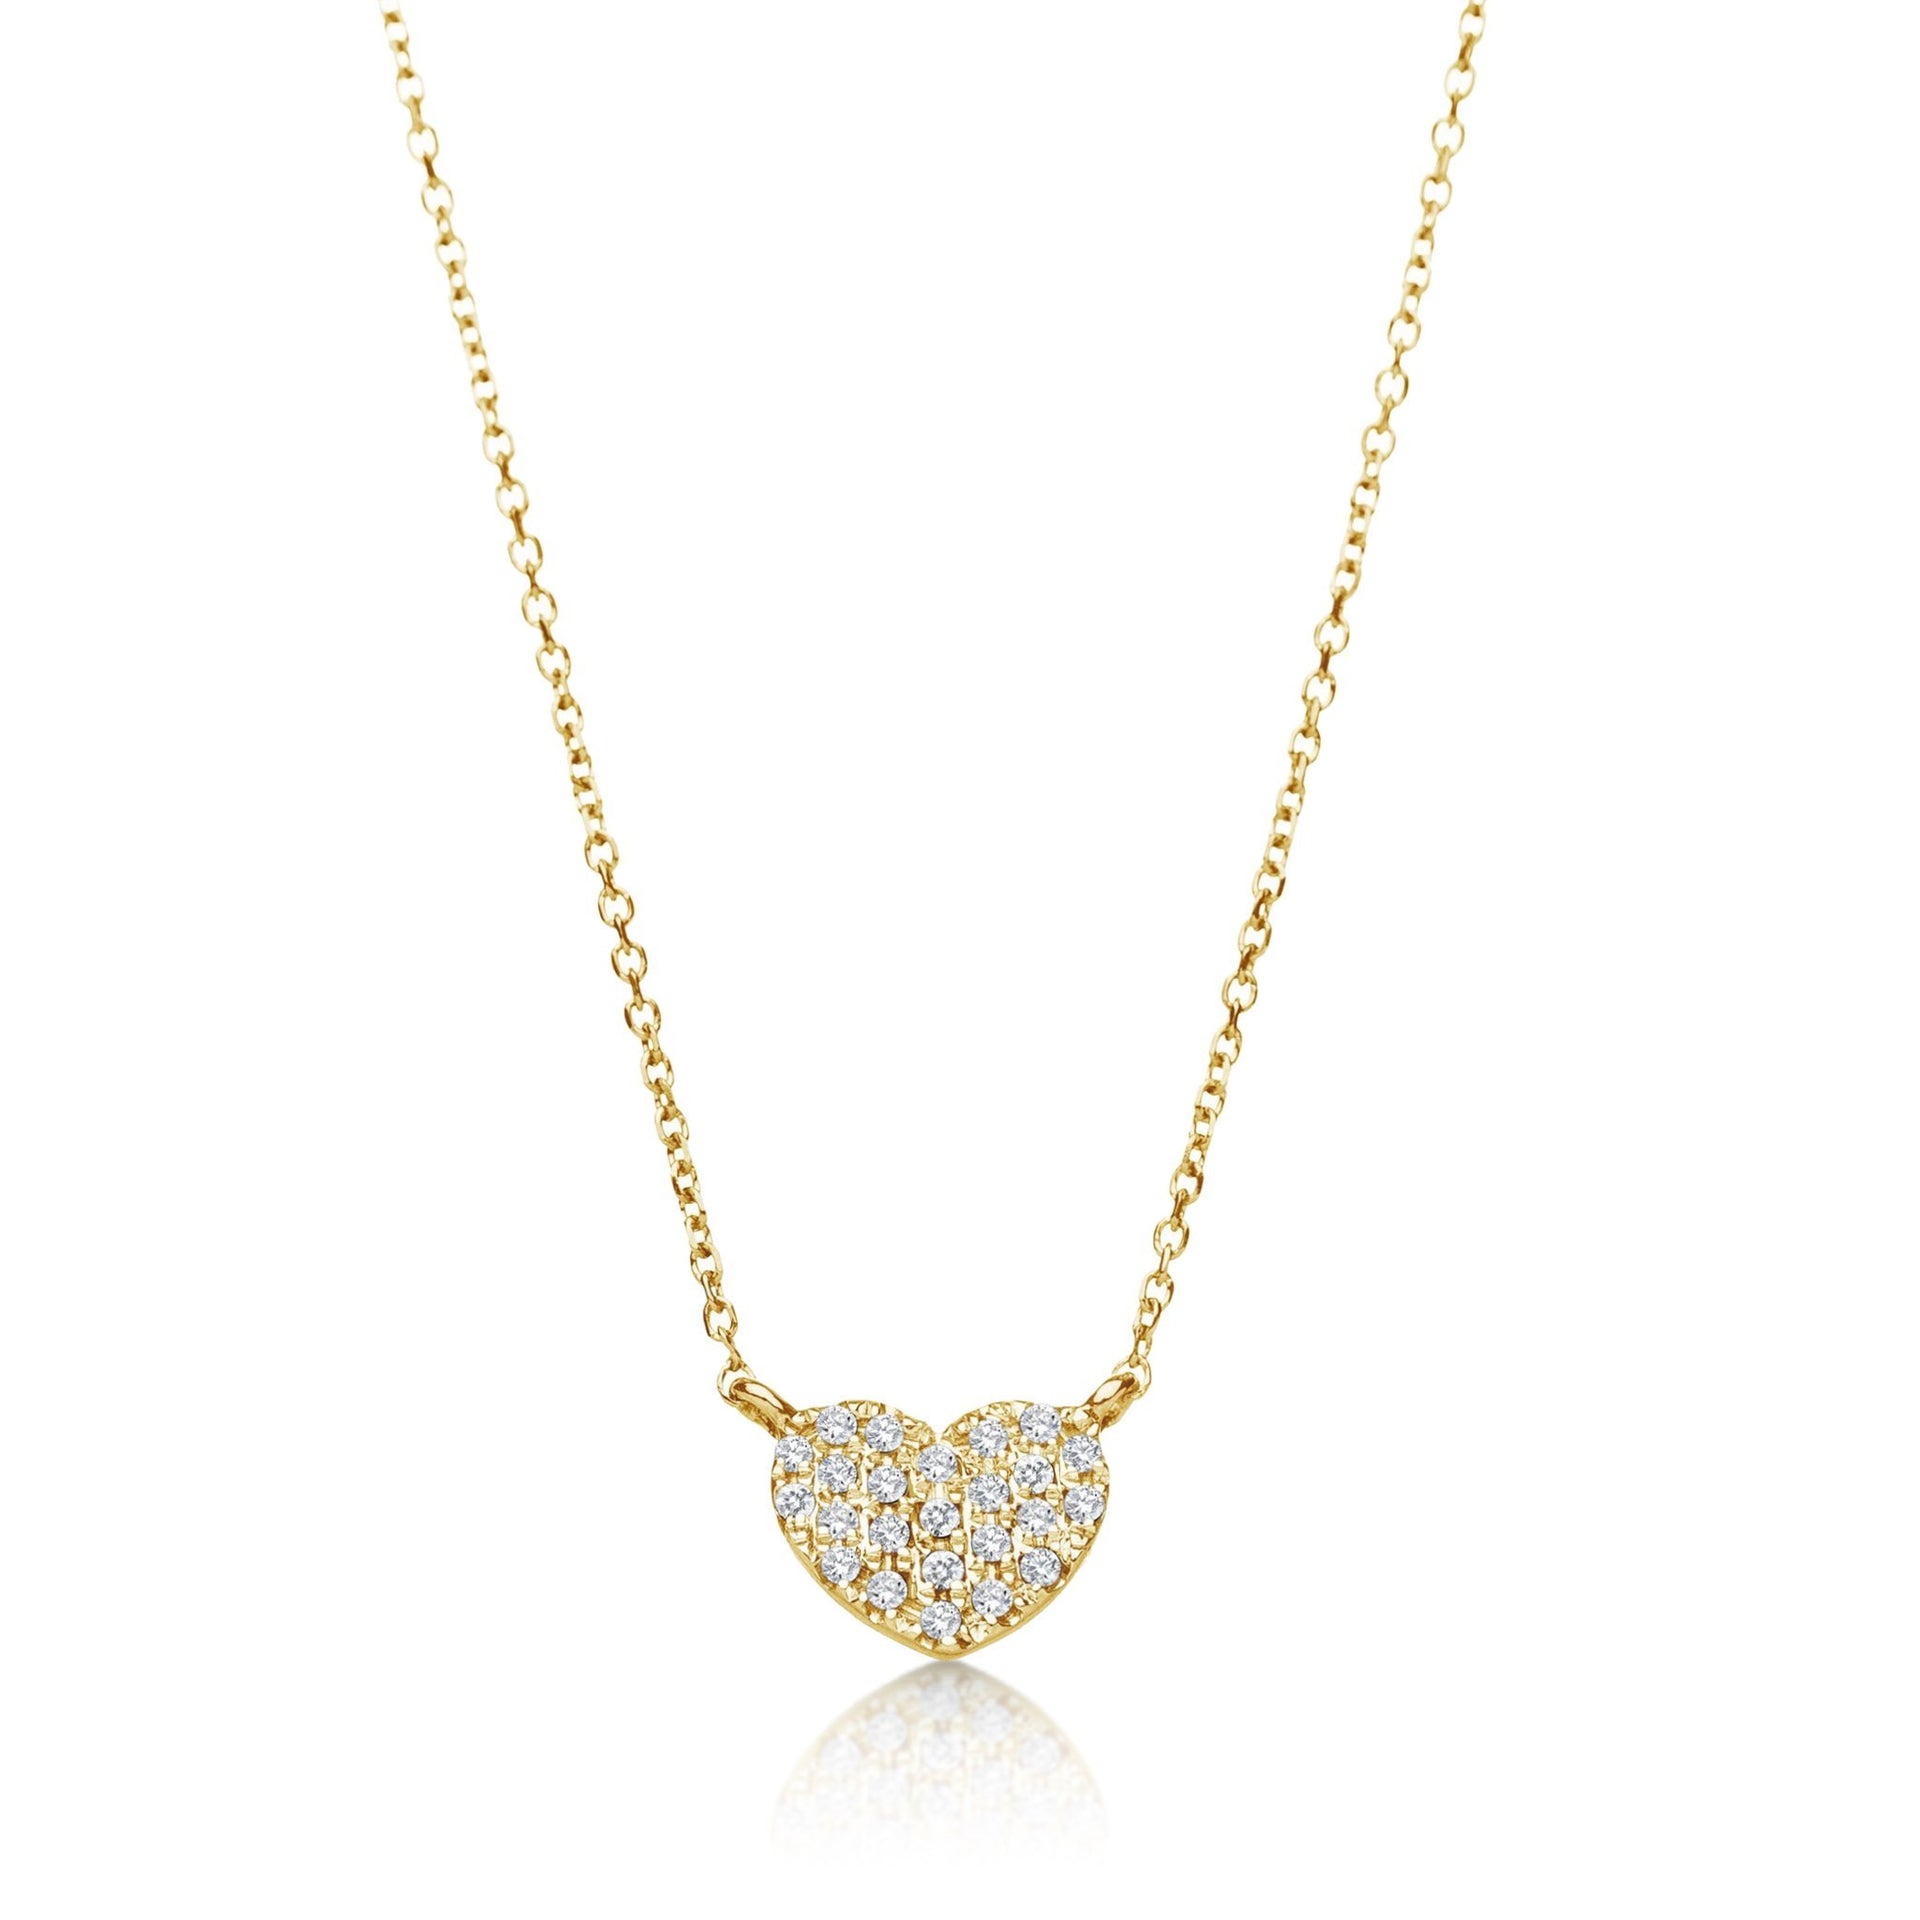 Diamond Pave Heart Necklace in 14k Gold